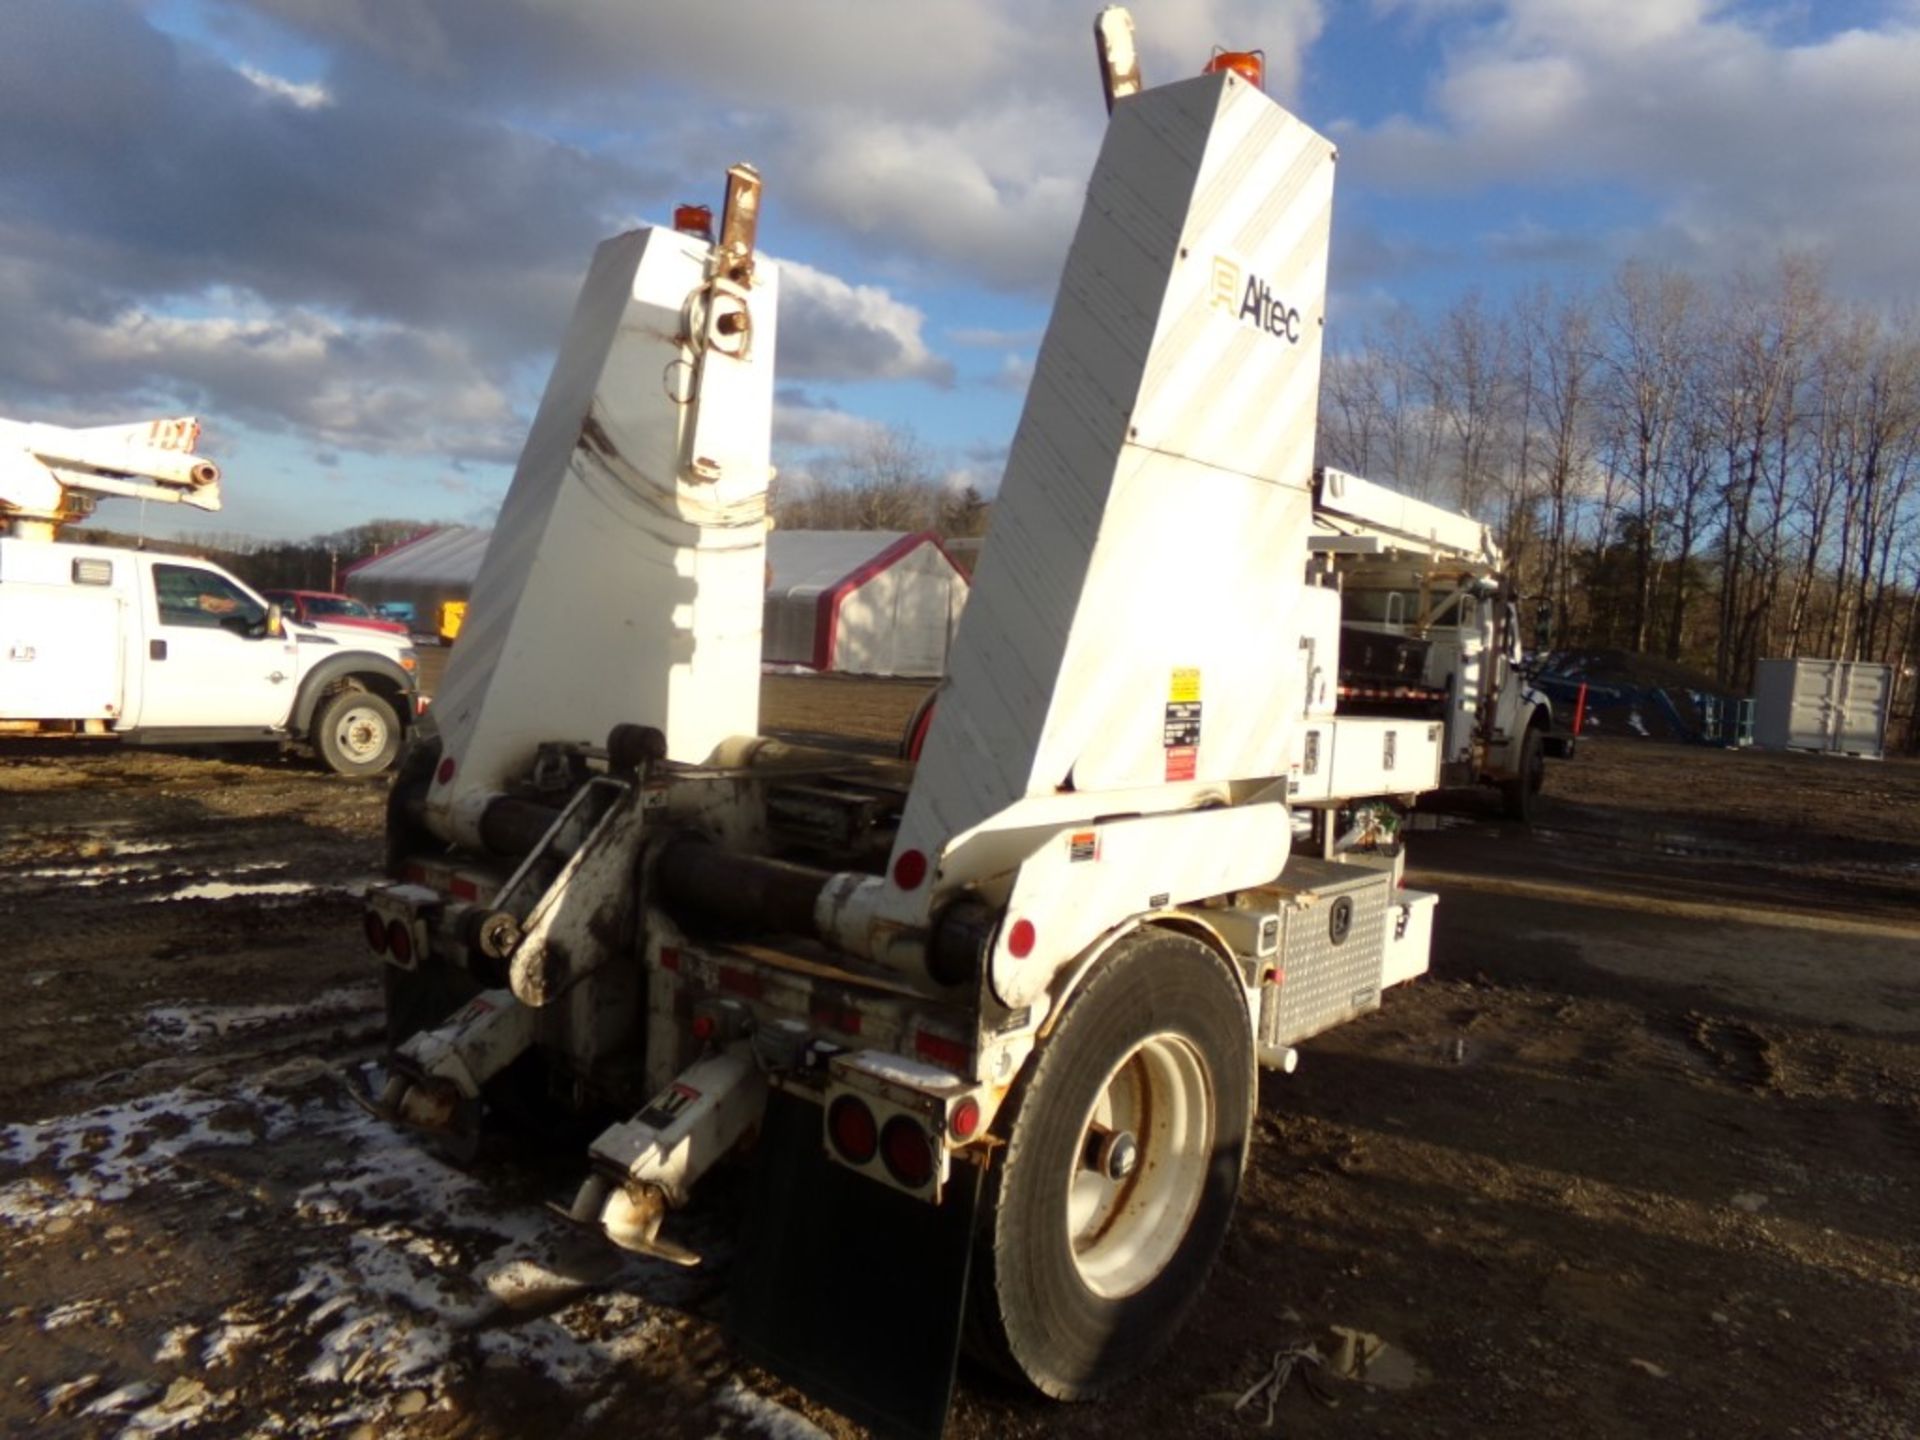 2007 Altec AD-108 Spool Trailer, With Diesel Engine, Pintle Hitch, Air Brakes, Single Axle, Vin #: - Image 3 of 4